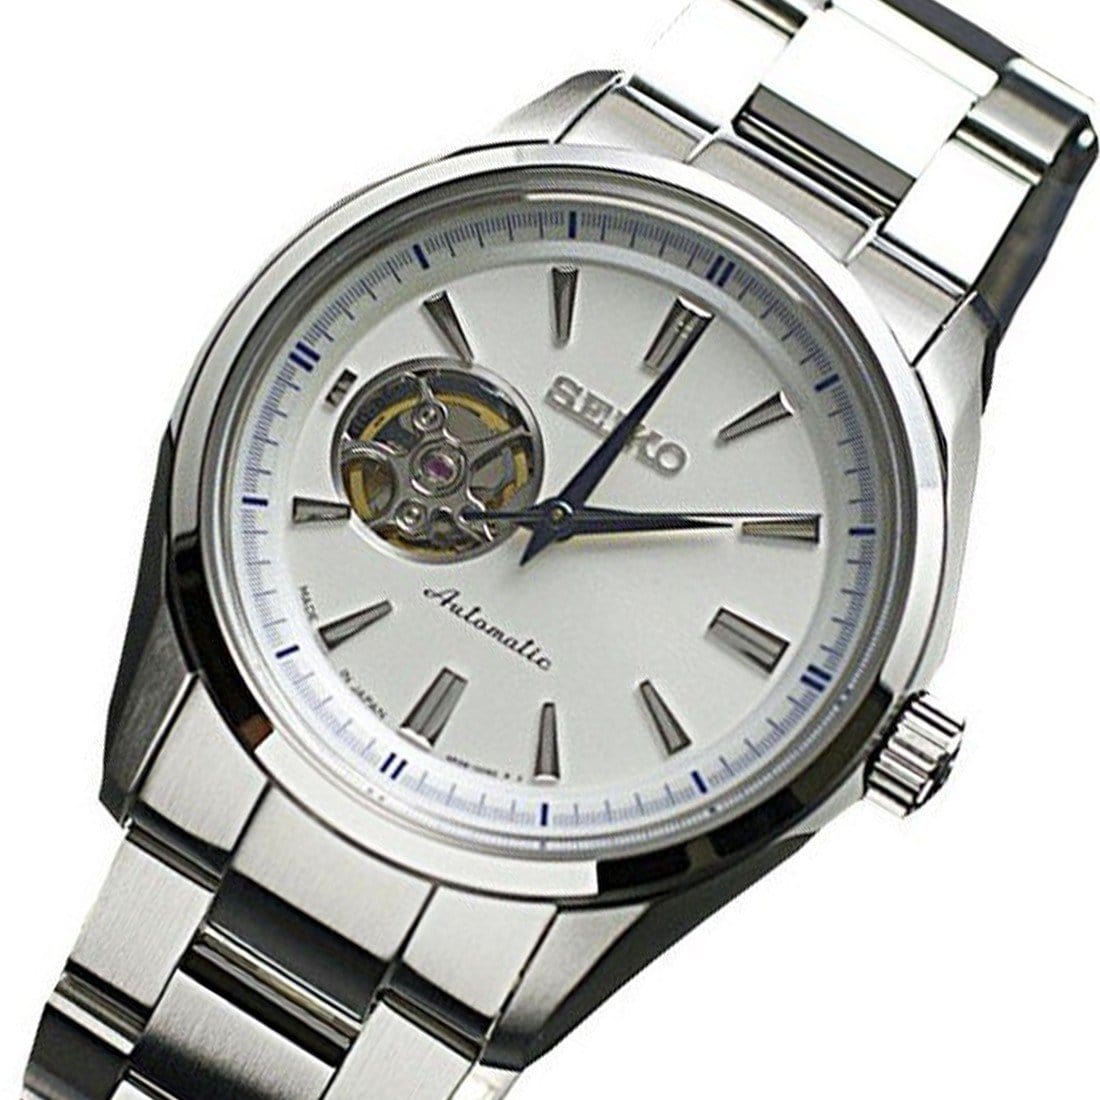 (PRE-ORDER) Seiko Presage Automatic Made in Japan Watch SARY051 SARY051J